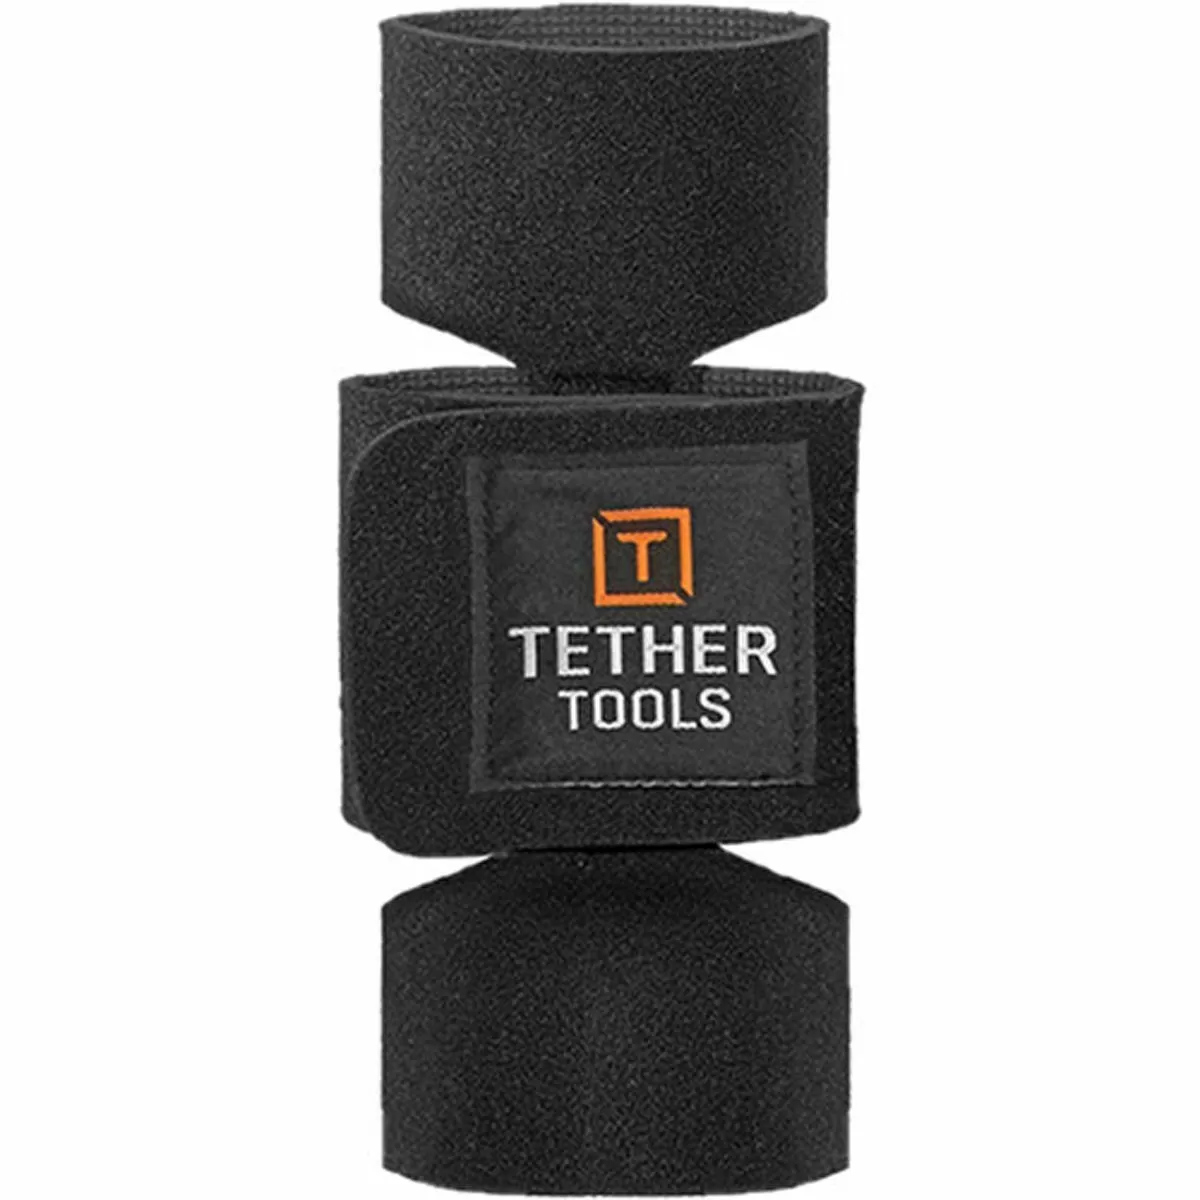 Tether tools. Tether Pro. Tether цена. Tether use Cases.